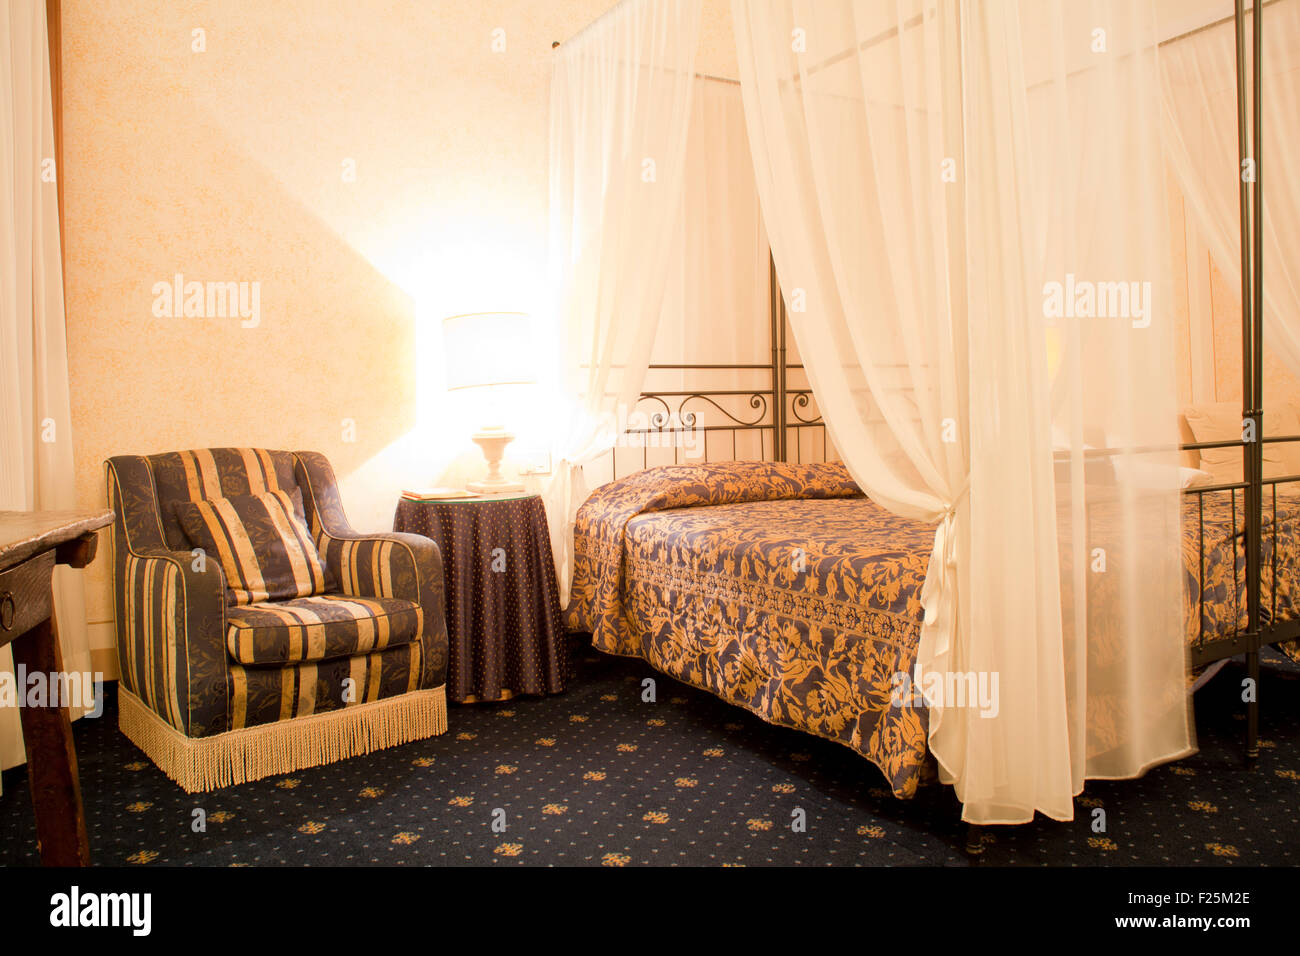 Sofa and bed in an albergue room Stock Photo